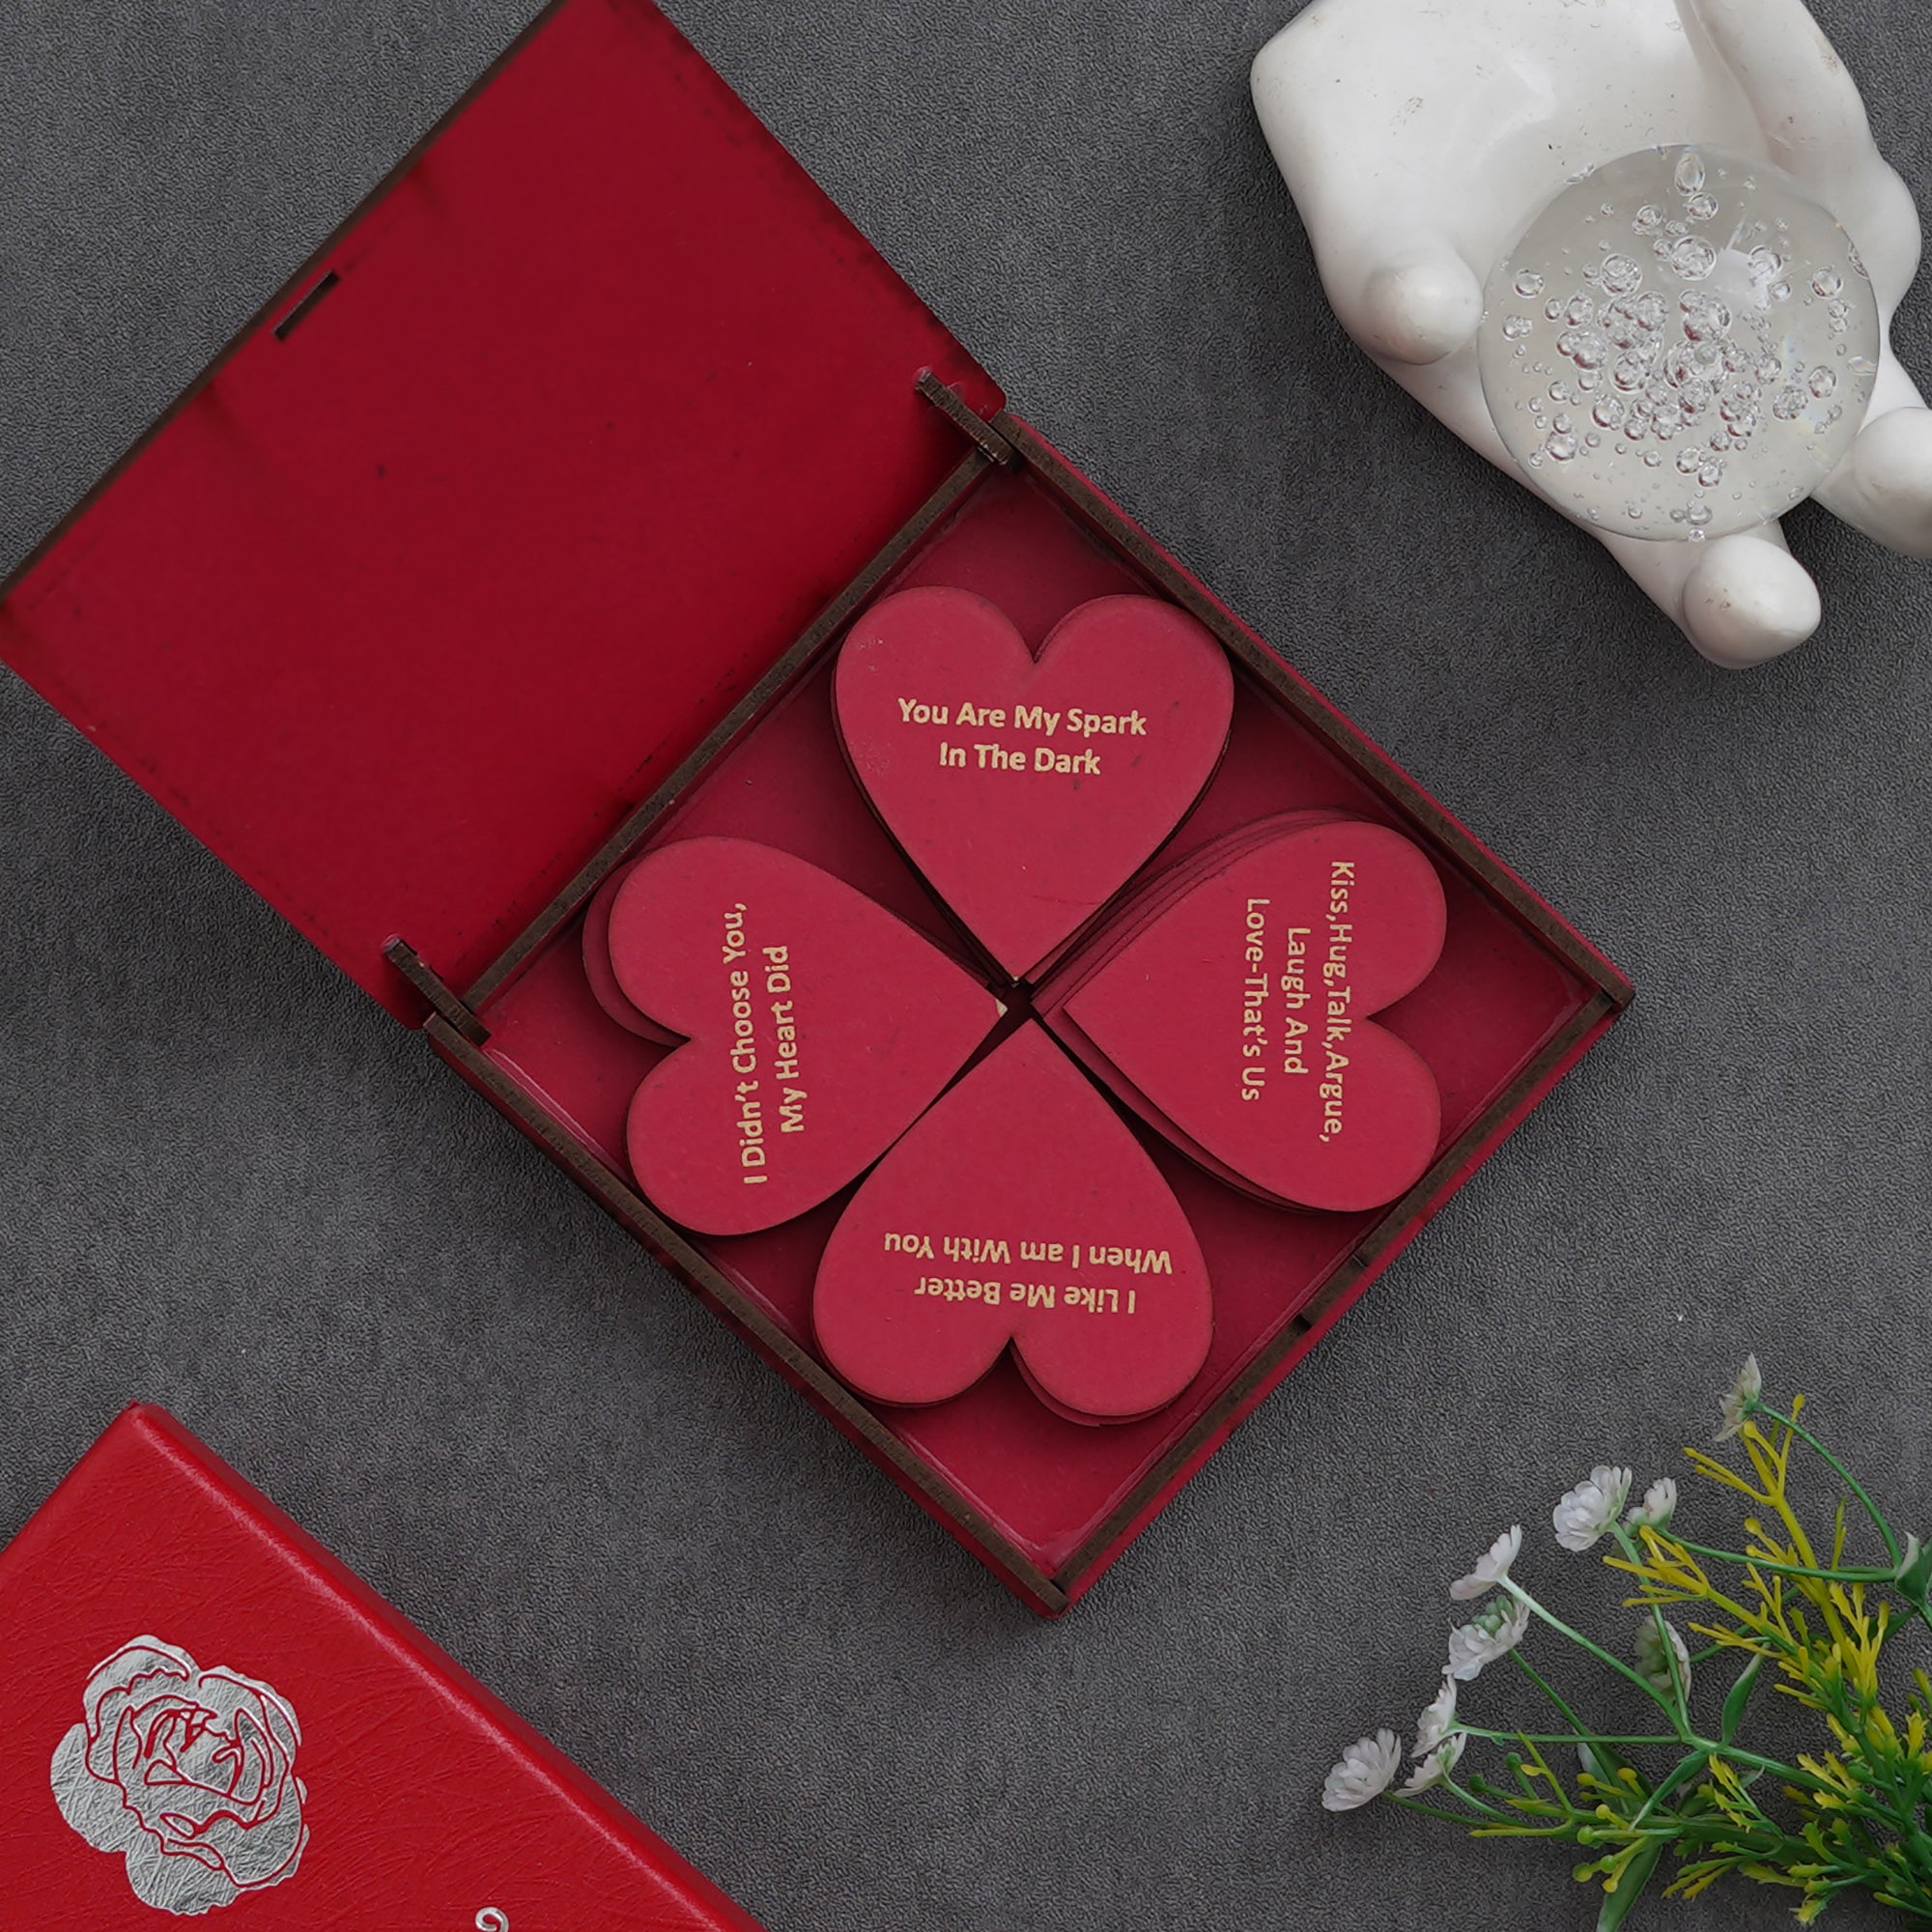 "20 Reasons Why I Love You" Printed on Little Red Hearts Decorative Valentine Wooden Gift Set Box 1